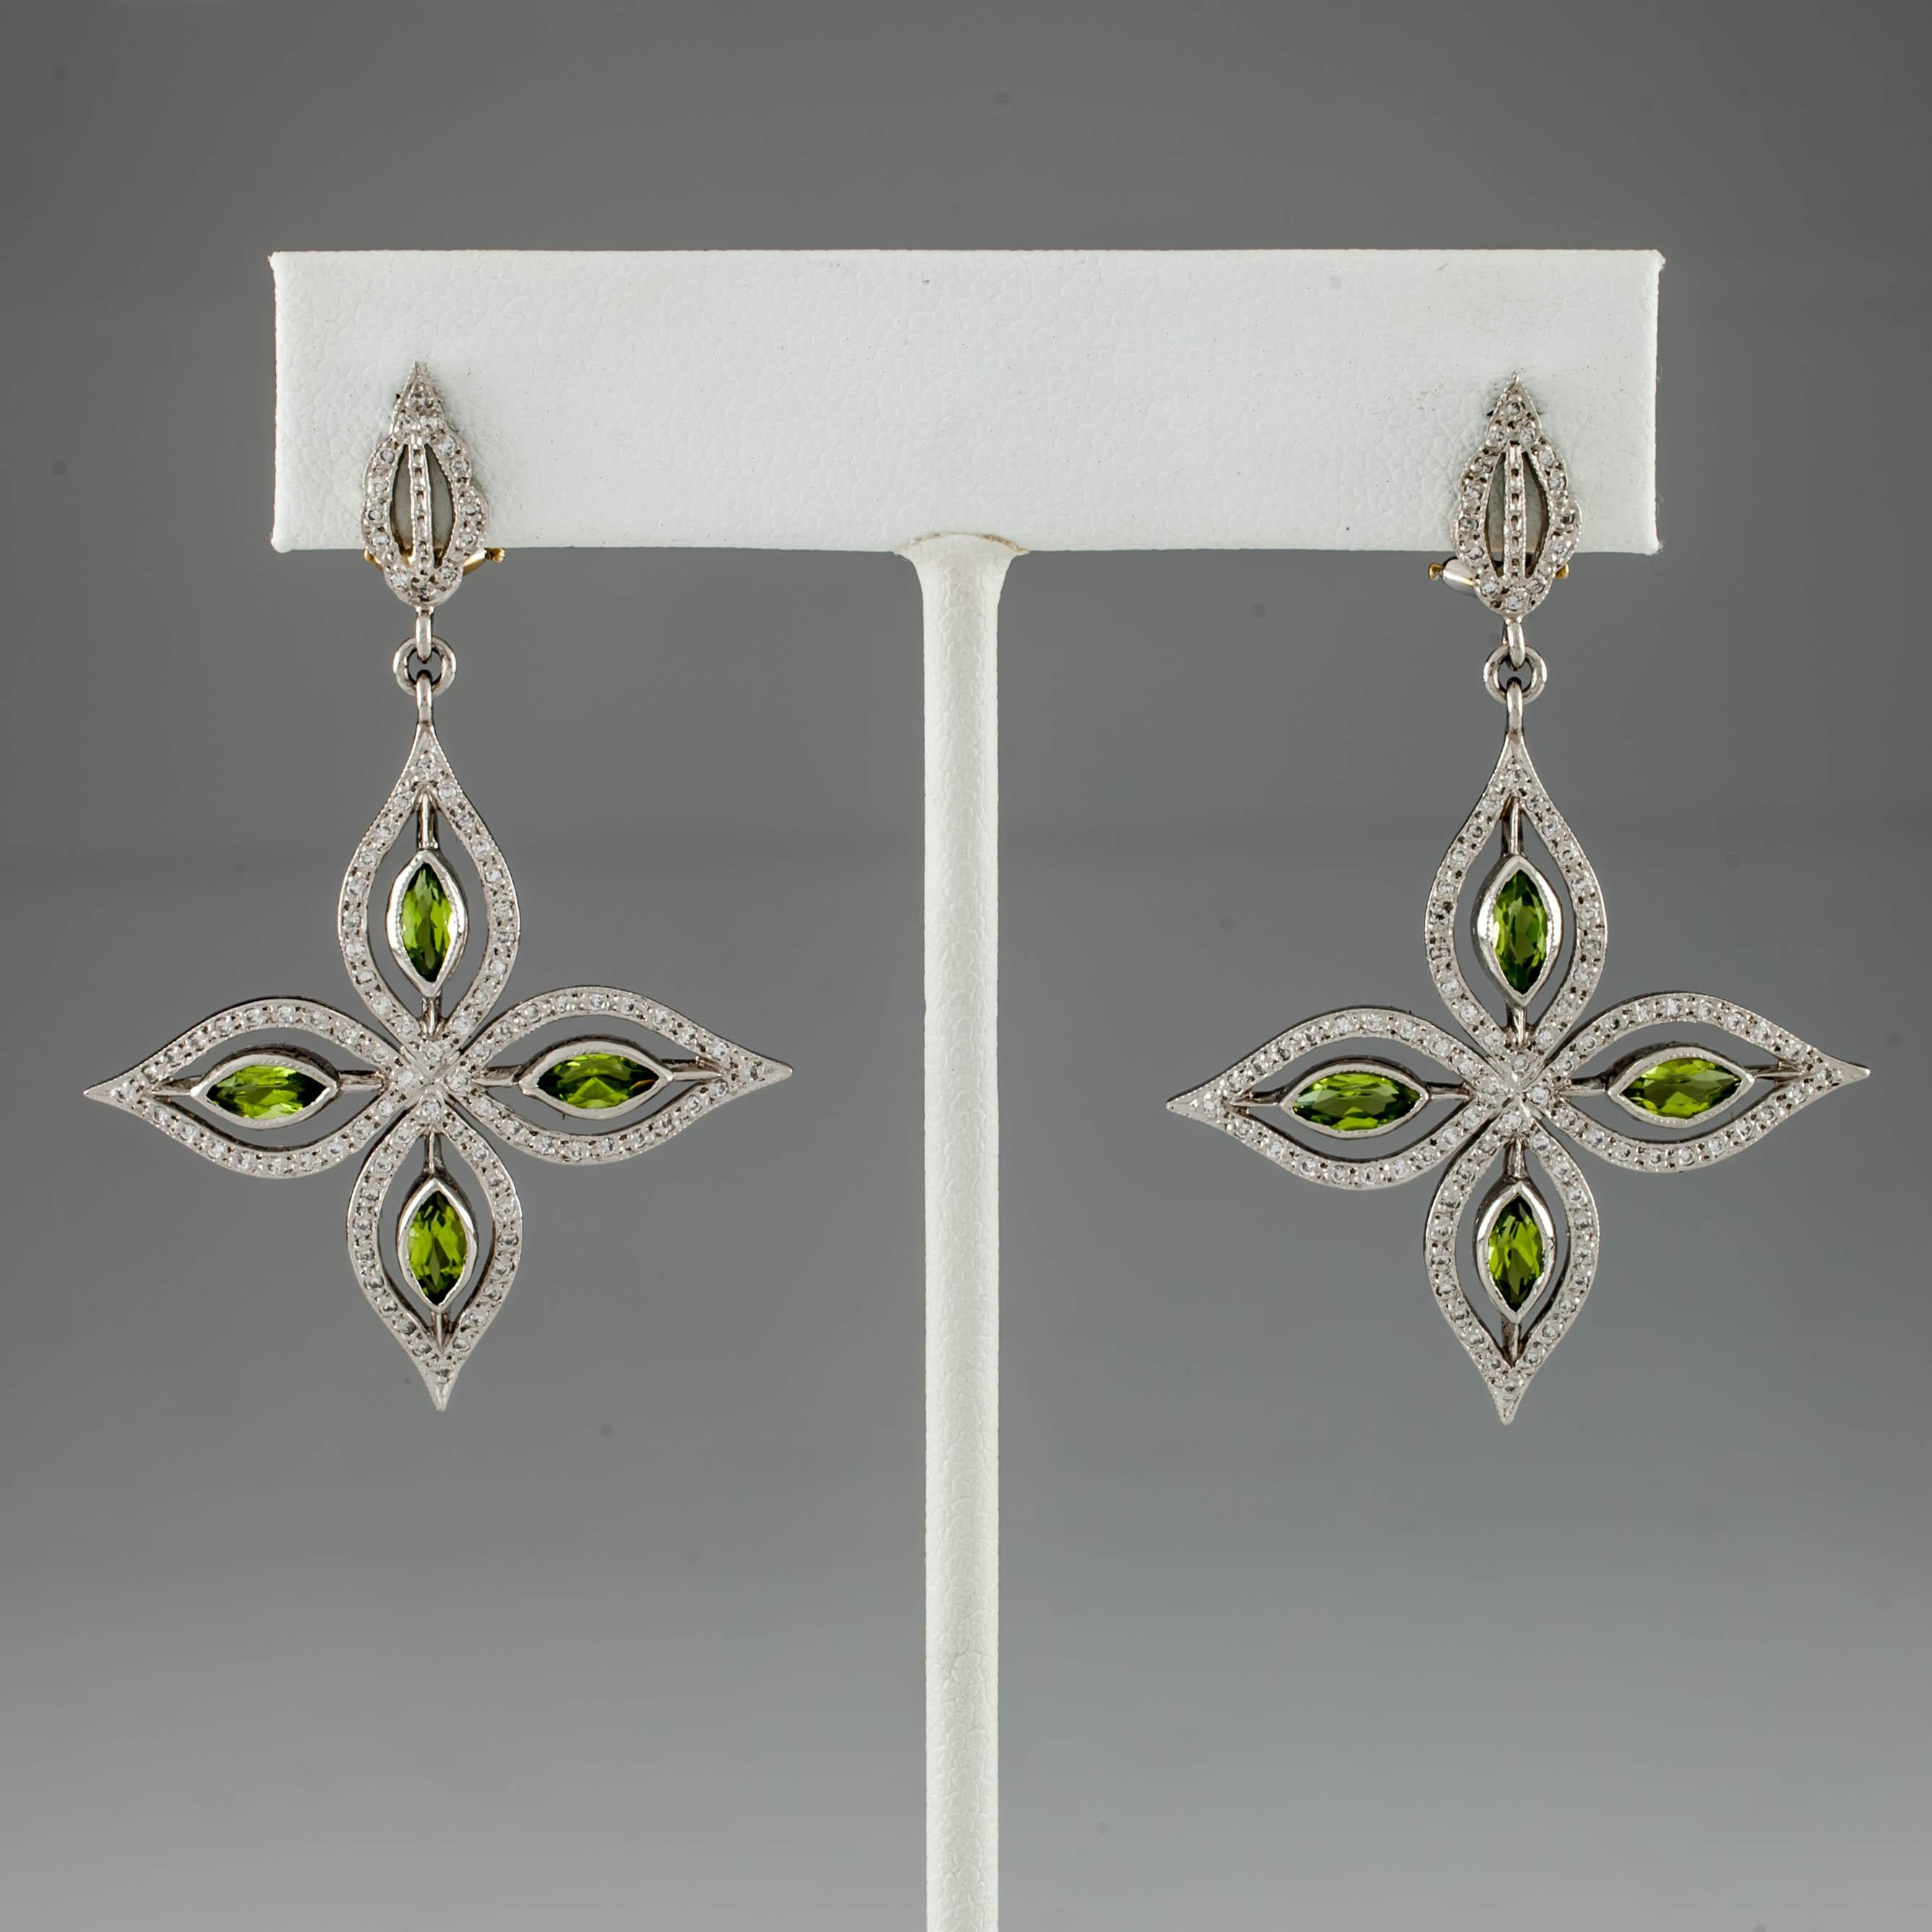 Beautiful Starburst Dangle Earrings
Feature Four Bezel-Set Marquise Peridots surrounded by bezel of round diamonds and milgrain detailing
Average Diamond Color = G - H
Average Clarity = SI
Total Carat Weight of All Stones = 1.0 Cts
Total Length of